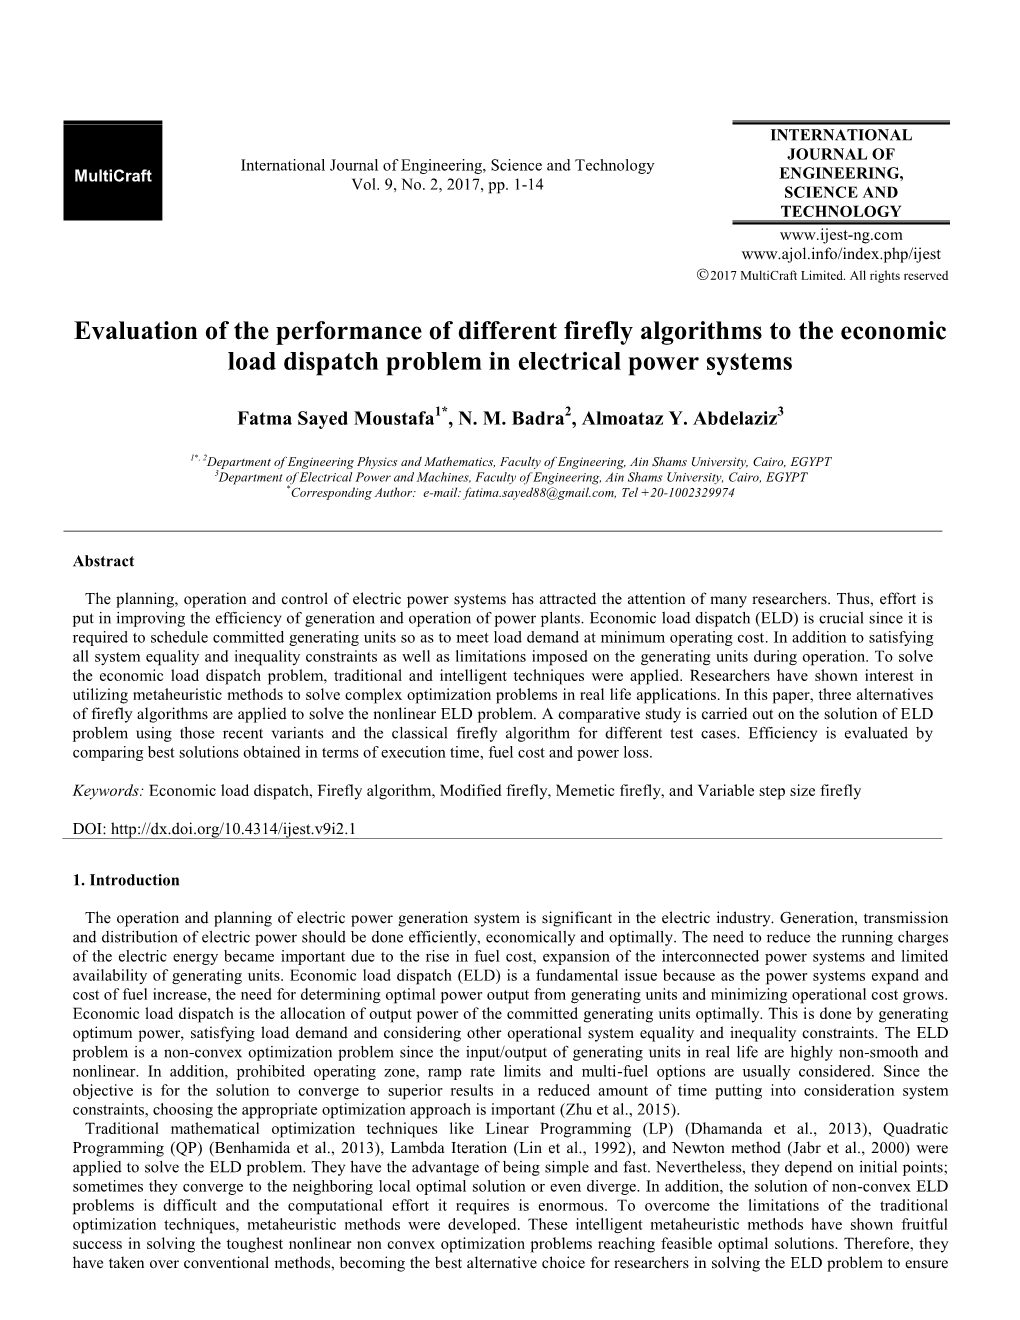 Evaluation of the Performance of Different Firefly Algorithms to the Economic Load Dispatch Problem in Electrical Power Systems